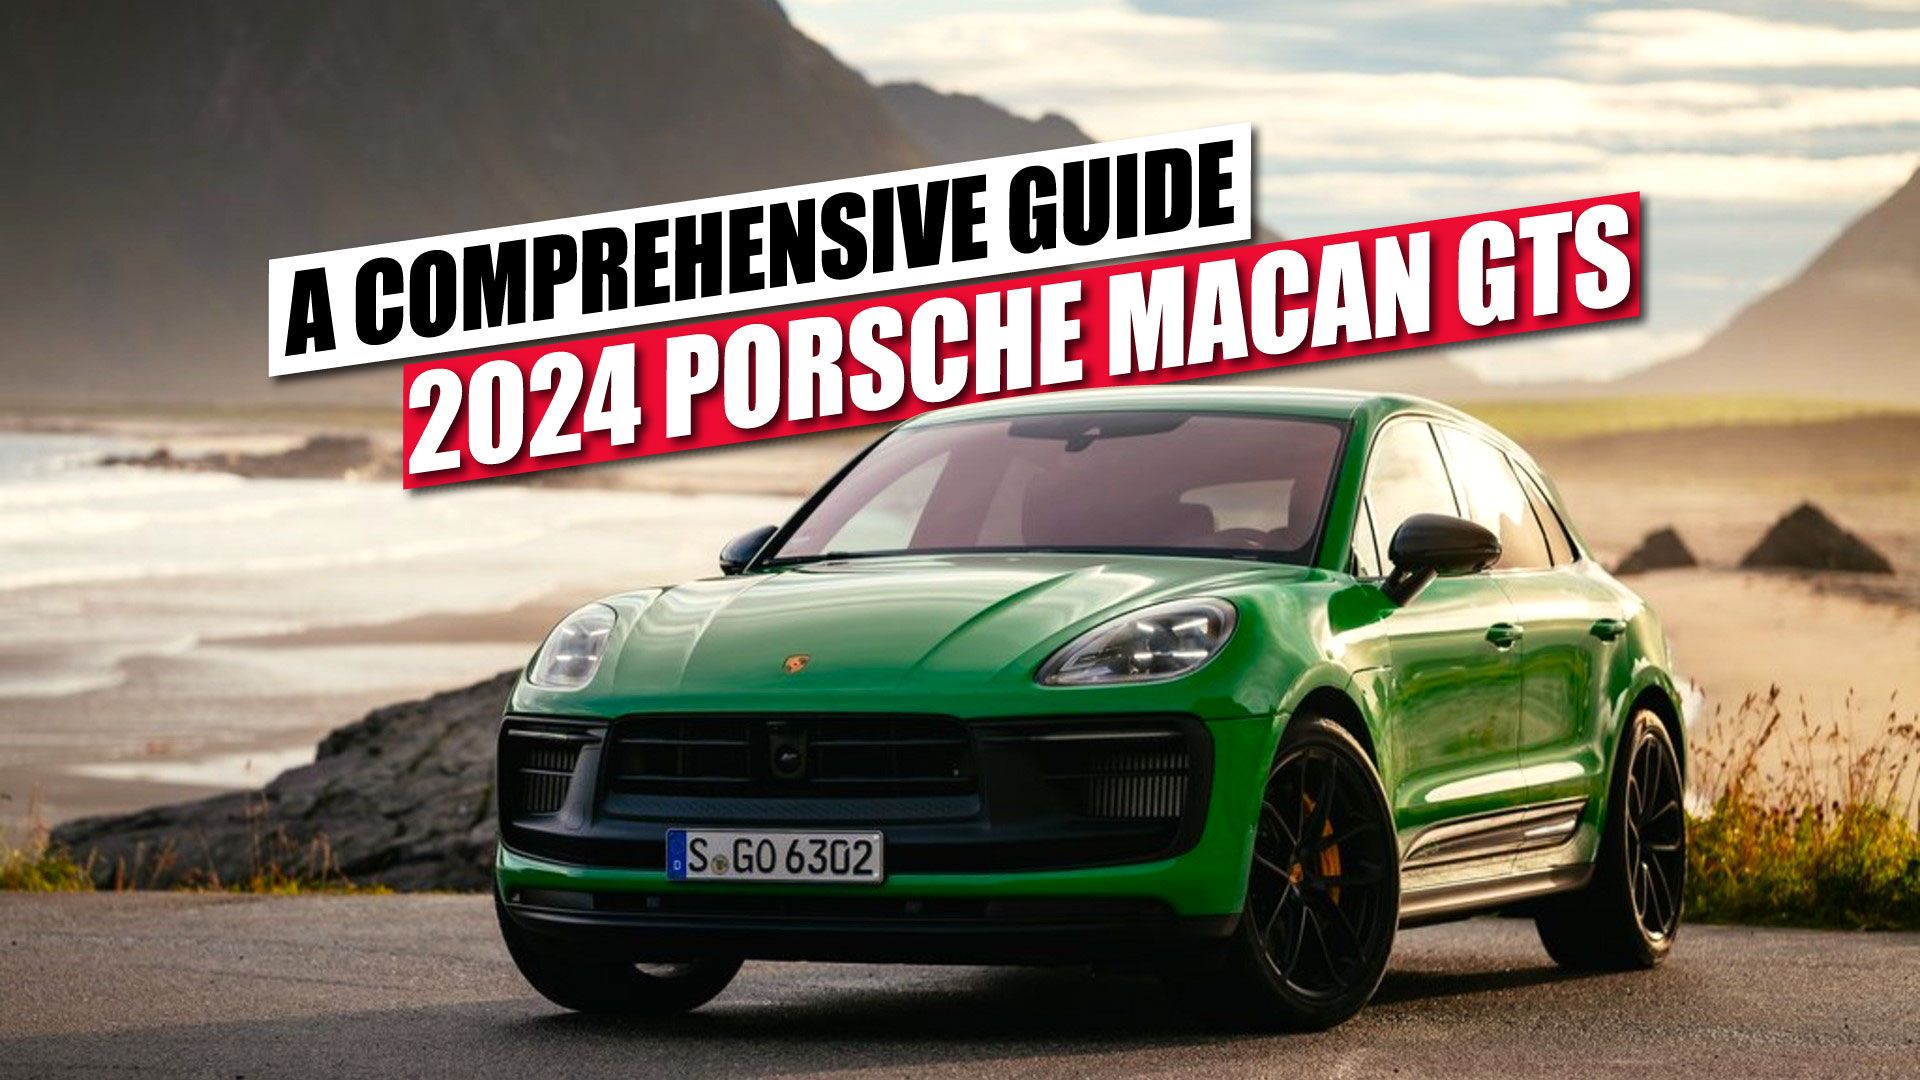 2024 Porsche Macan GTS: A Comprehensive Guide On Features, Specs, And Pricing